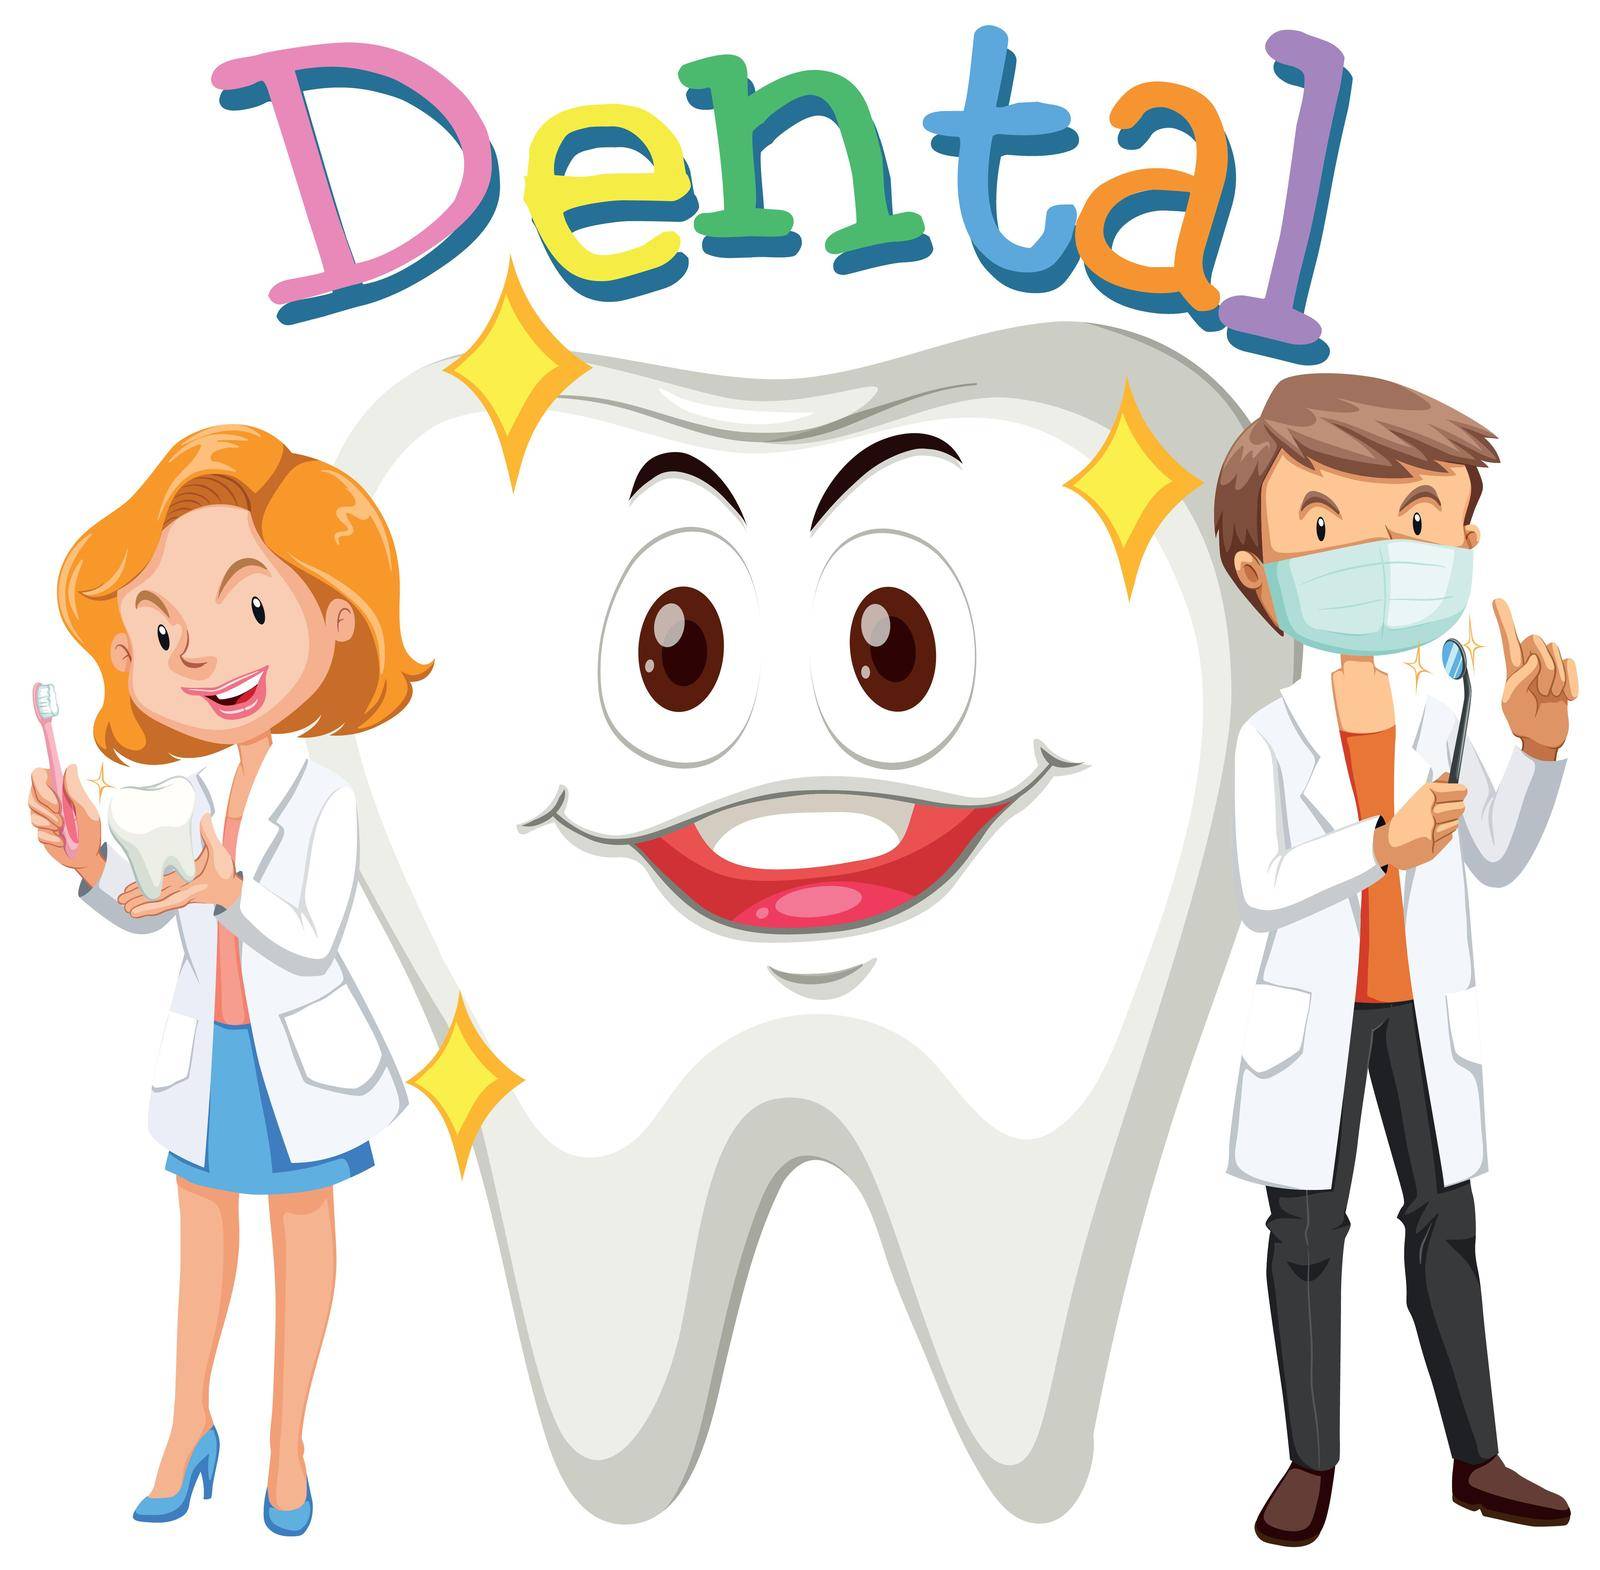 Dentists and clean tooth by iimages